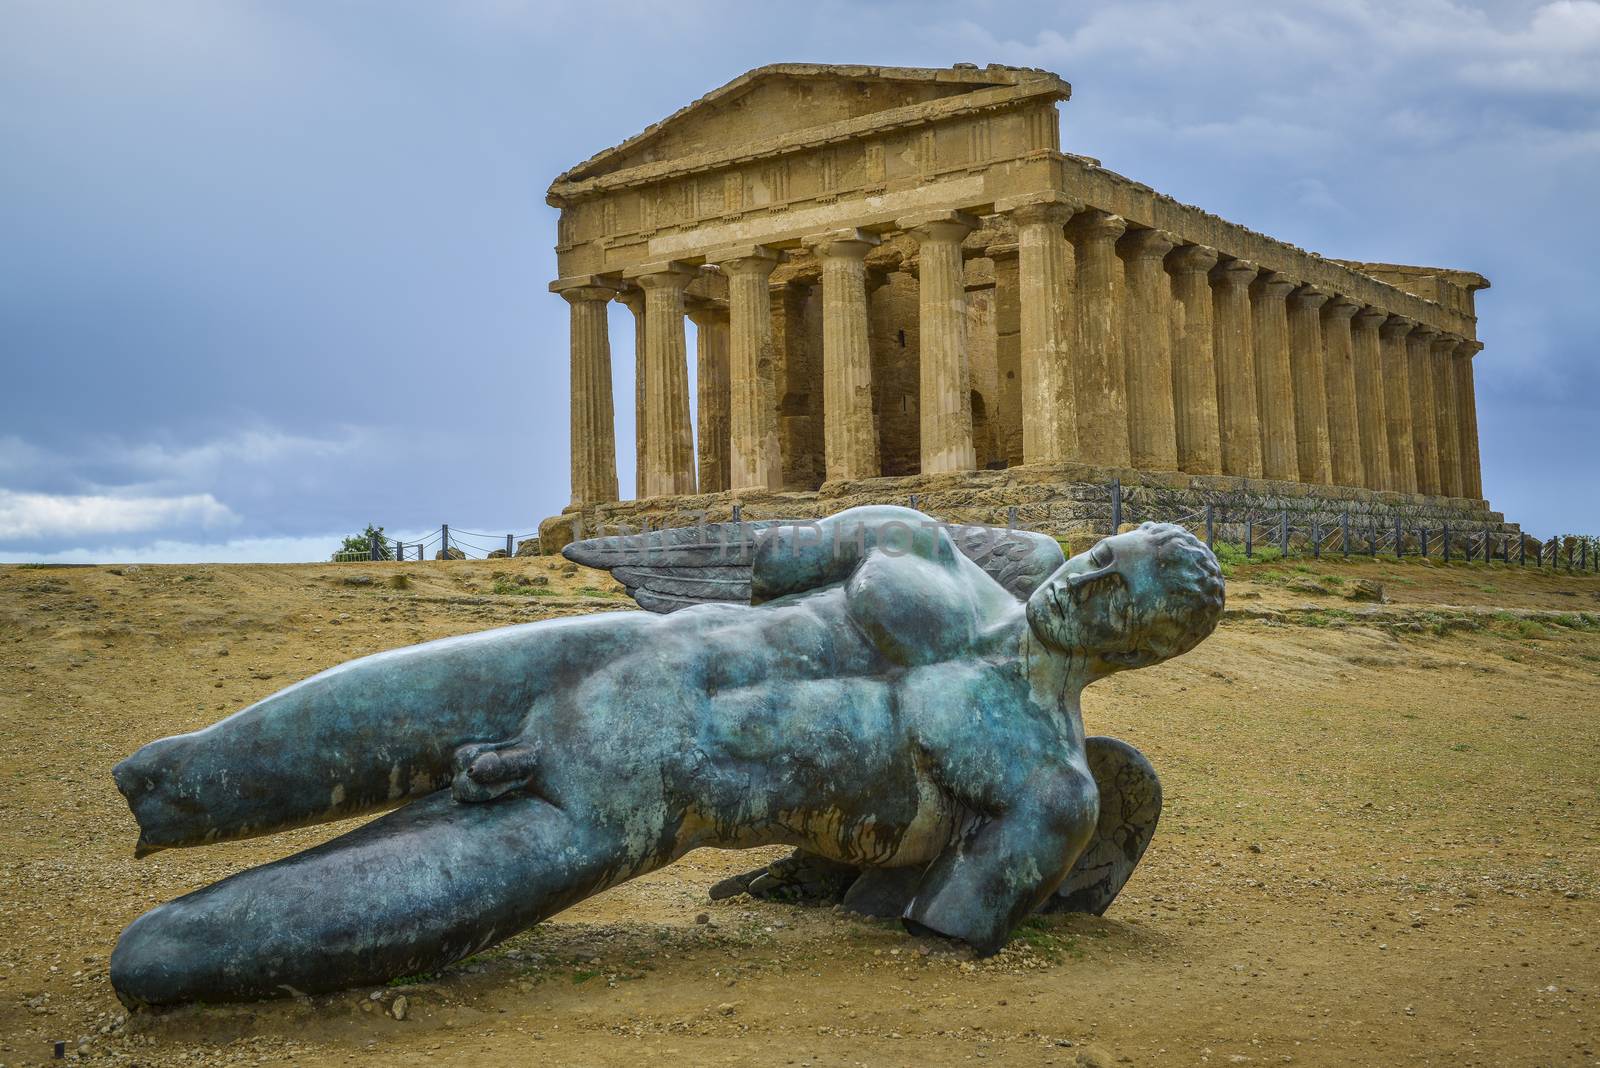 bronze statue of fallen ikaro on the background the concorde temple, Agrigento, Sicily, Italy